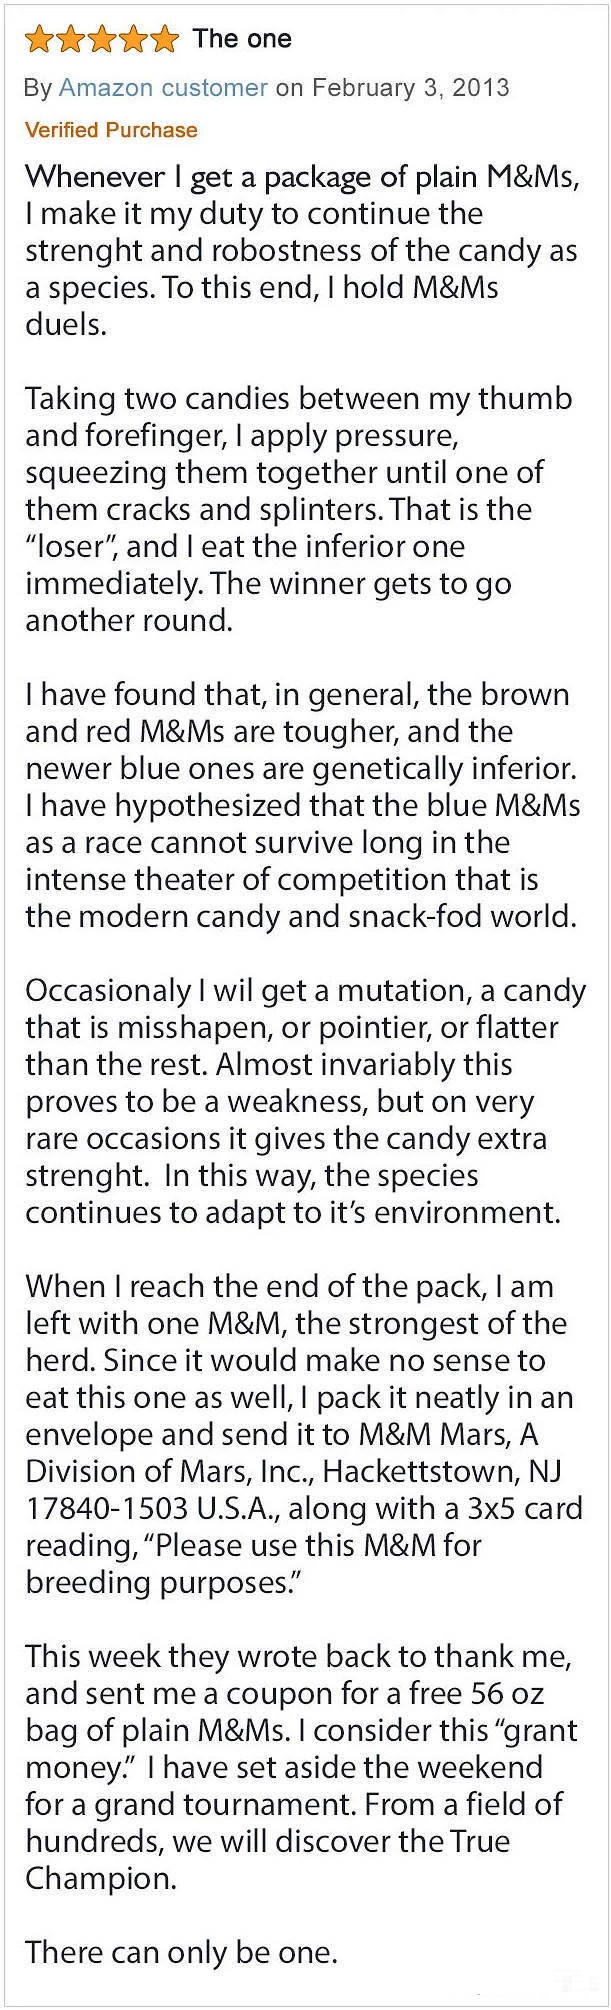 amazon reviews - The ne t on Fry 2013 By An Whenever I get a package of plain M&Ms. I make it my duty to continue the strenght and robostness of the candy as a species. To this end, I hold M&M duels. Taking two candies between my thumb and forefinger. I a